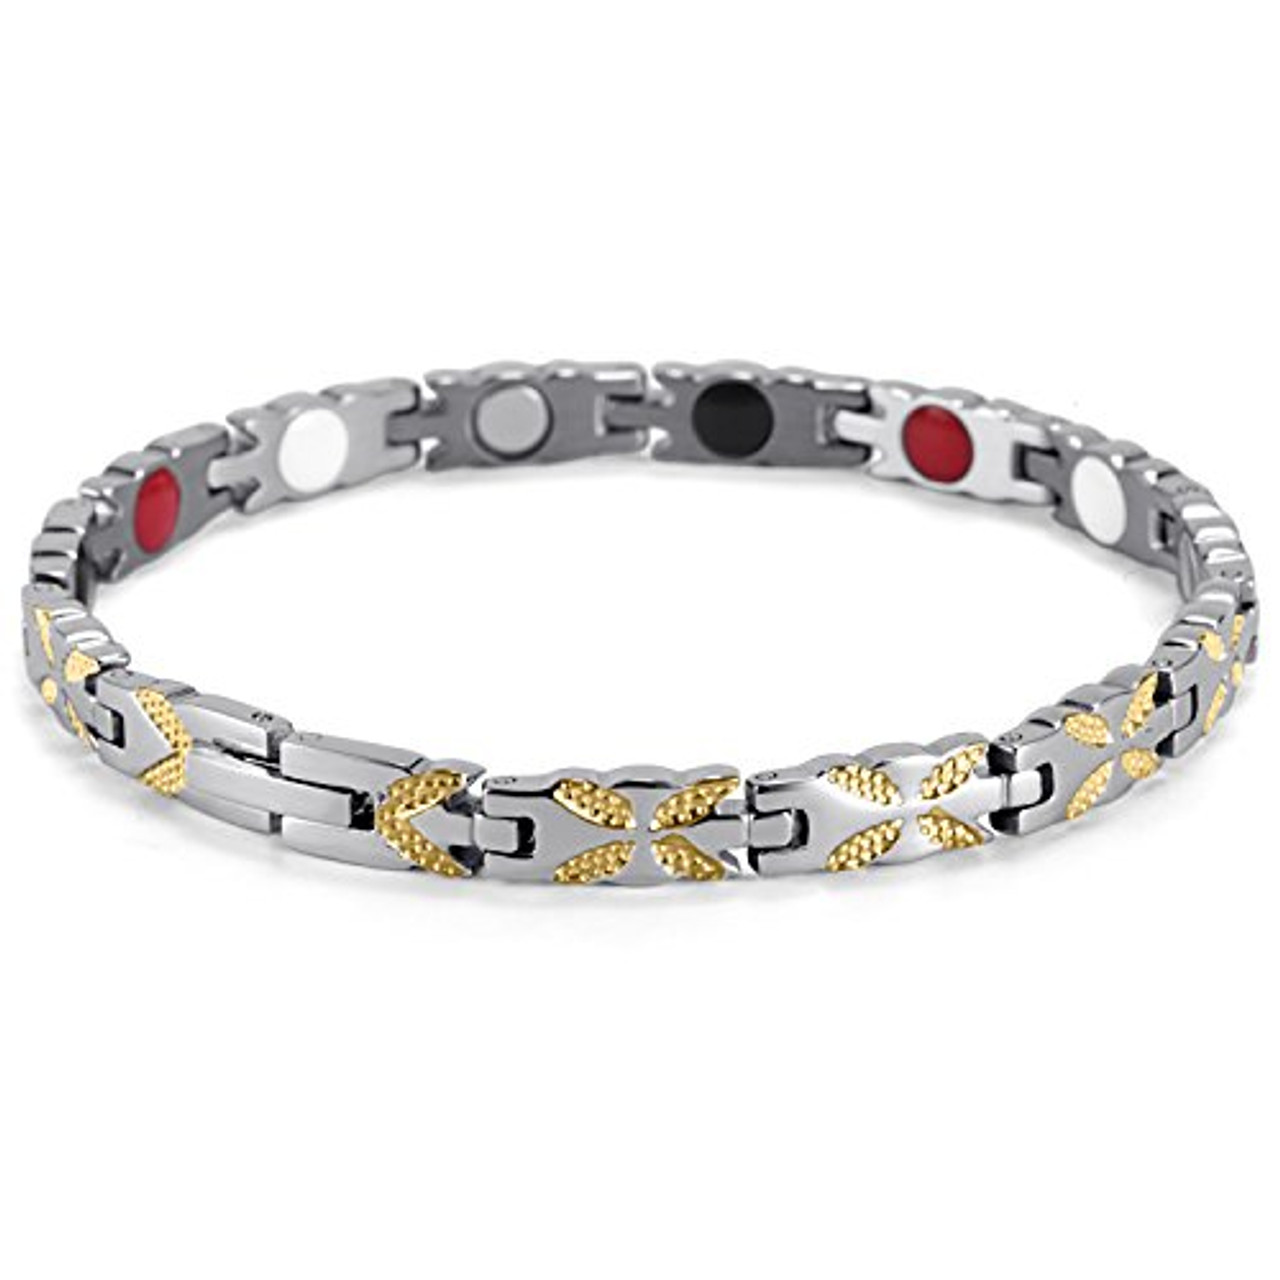 8" Inch Length - Women's Silver and Gold Stainless Steel Magnetic Bracelet (Magnets, far infrared, germanium, negative Ion bracelet)